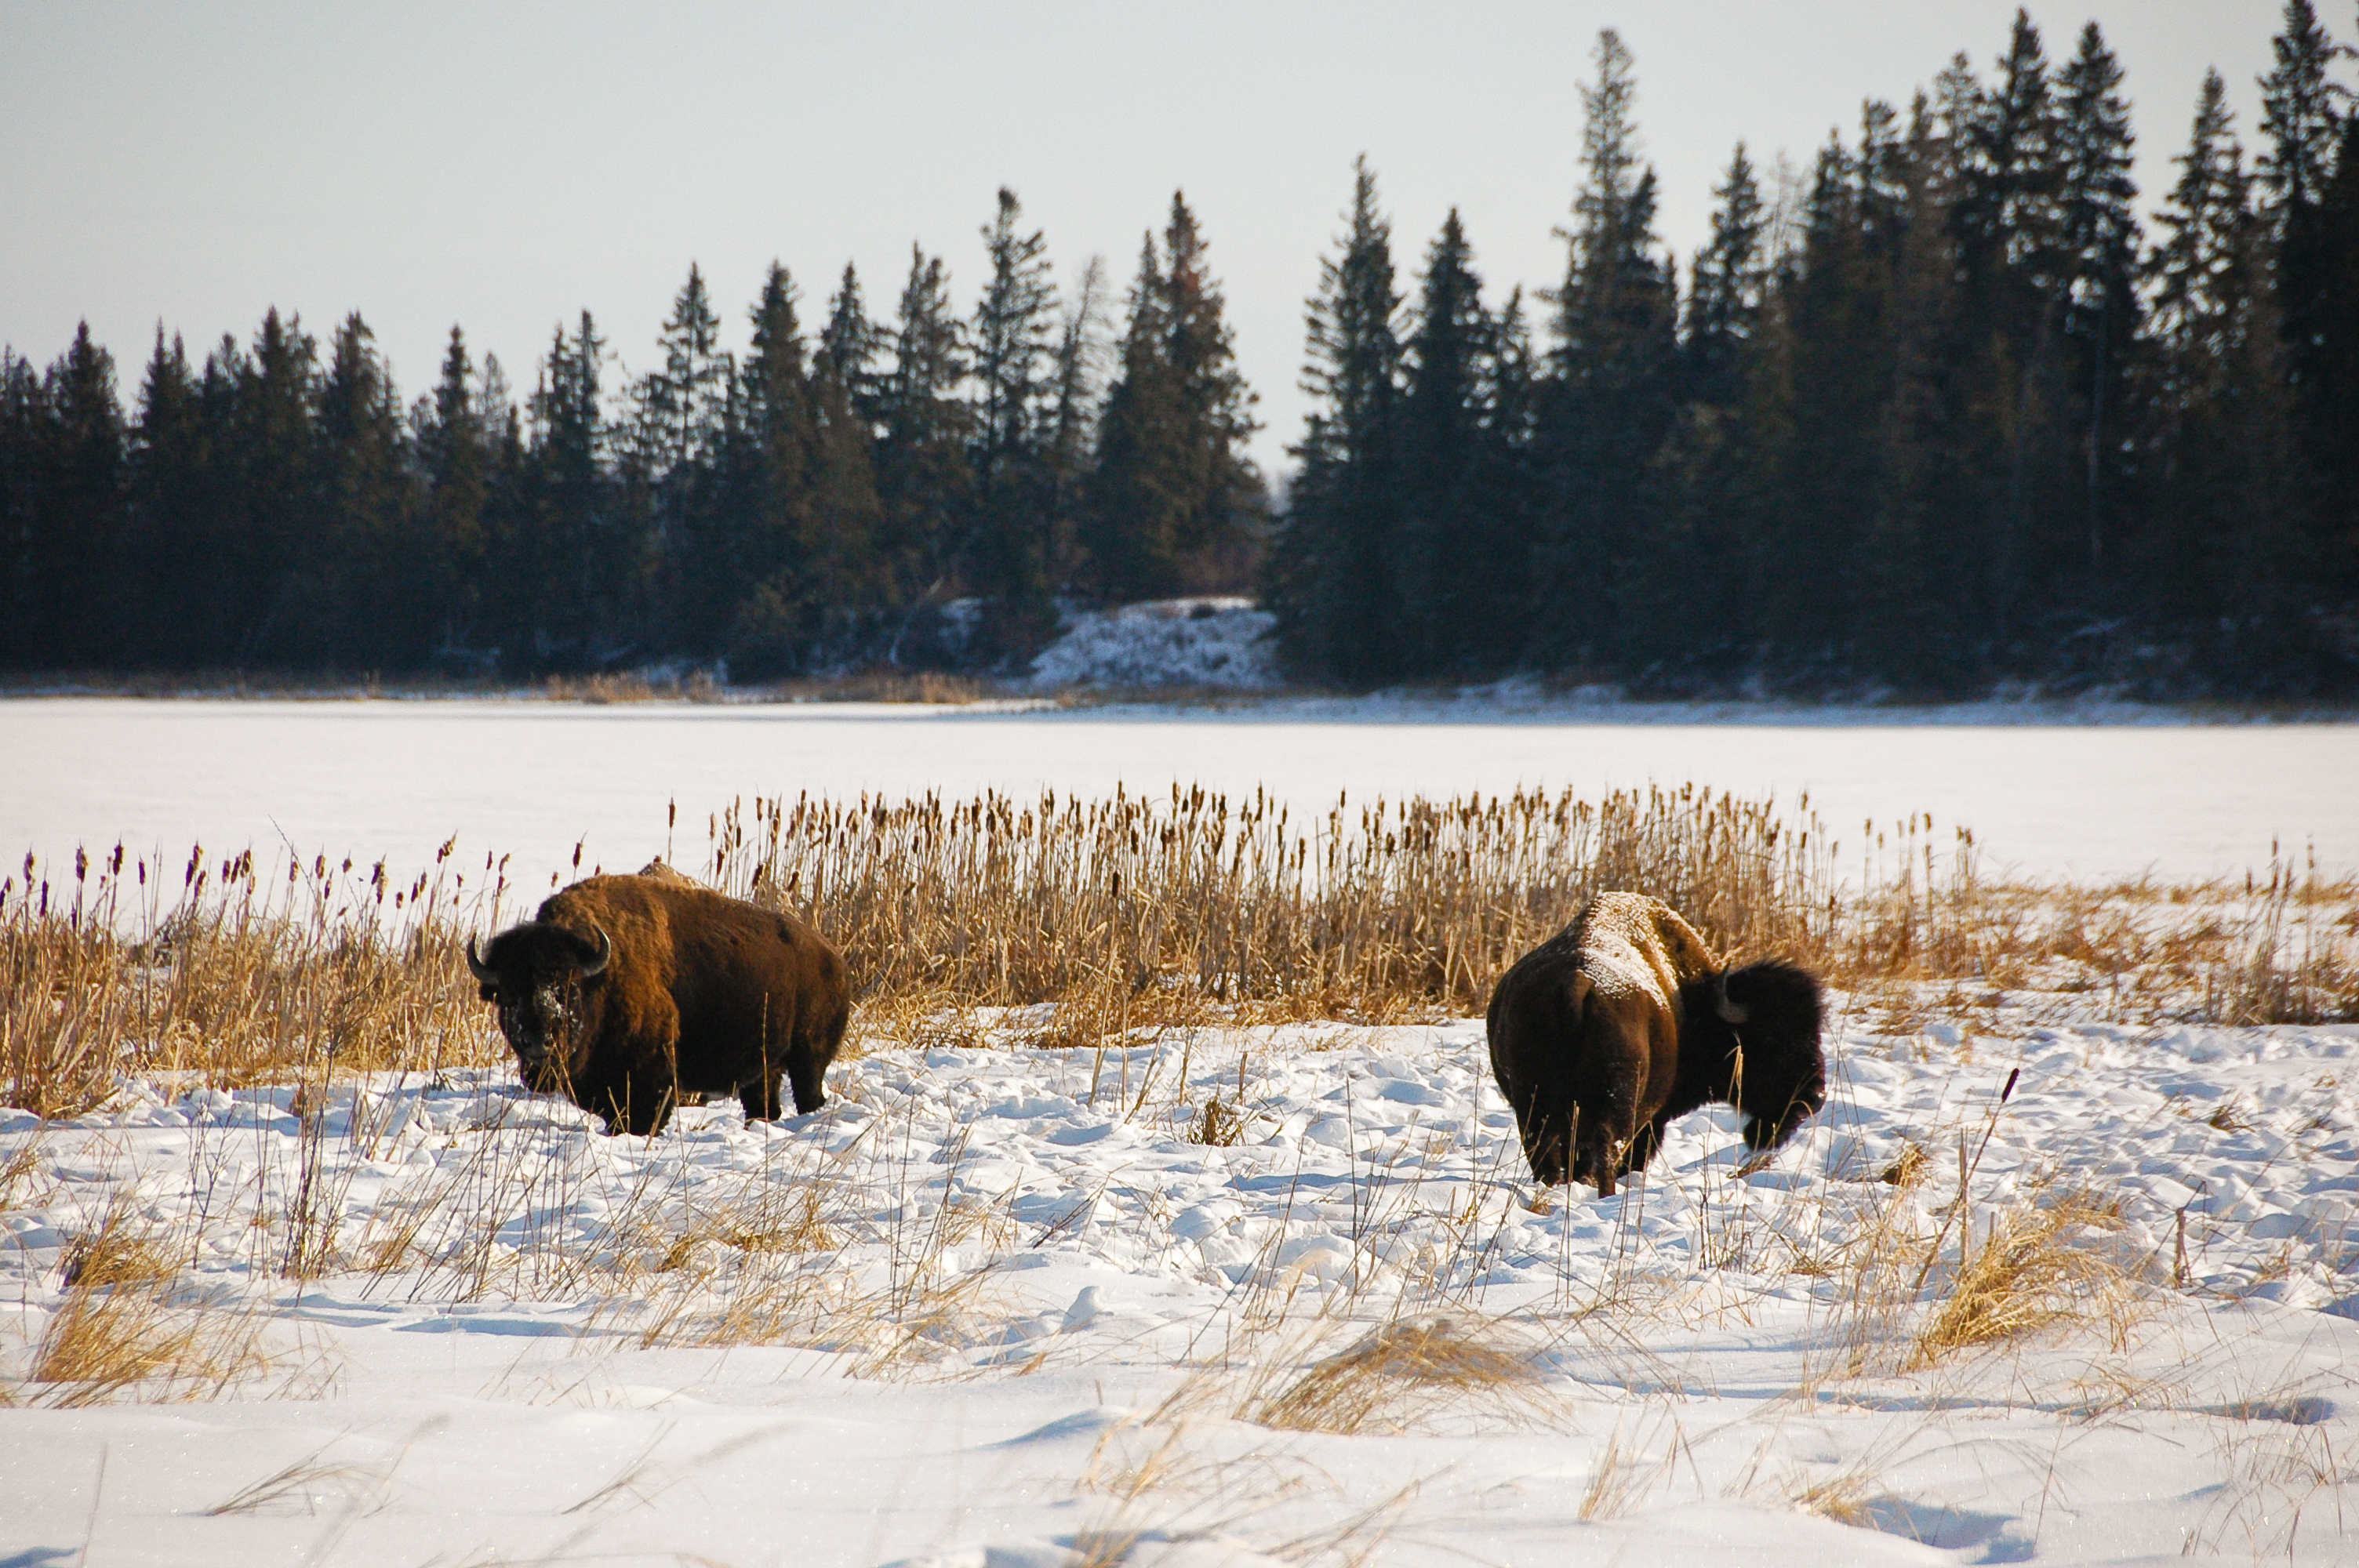 Saving wild buffaloes in Canada means saving biodiversity and water